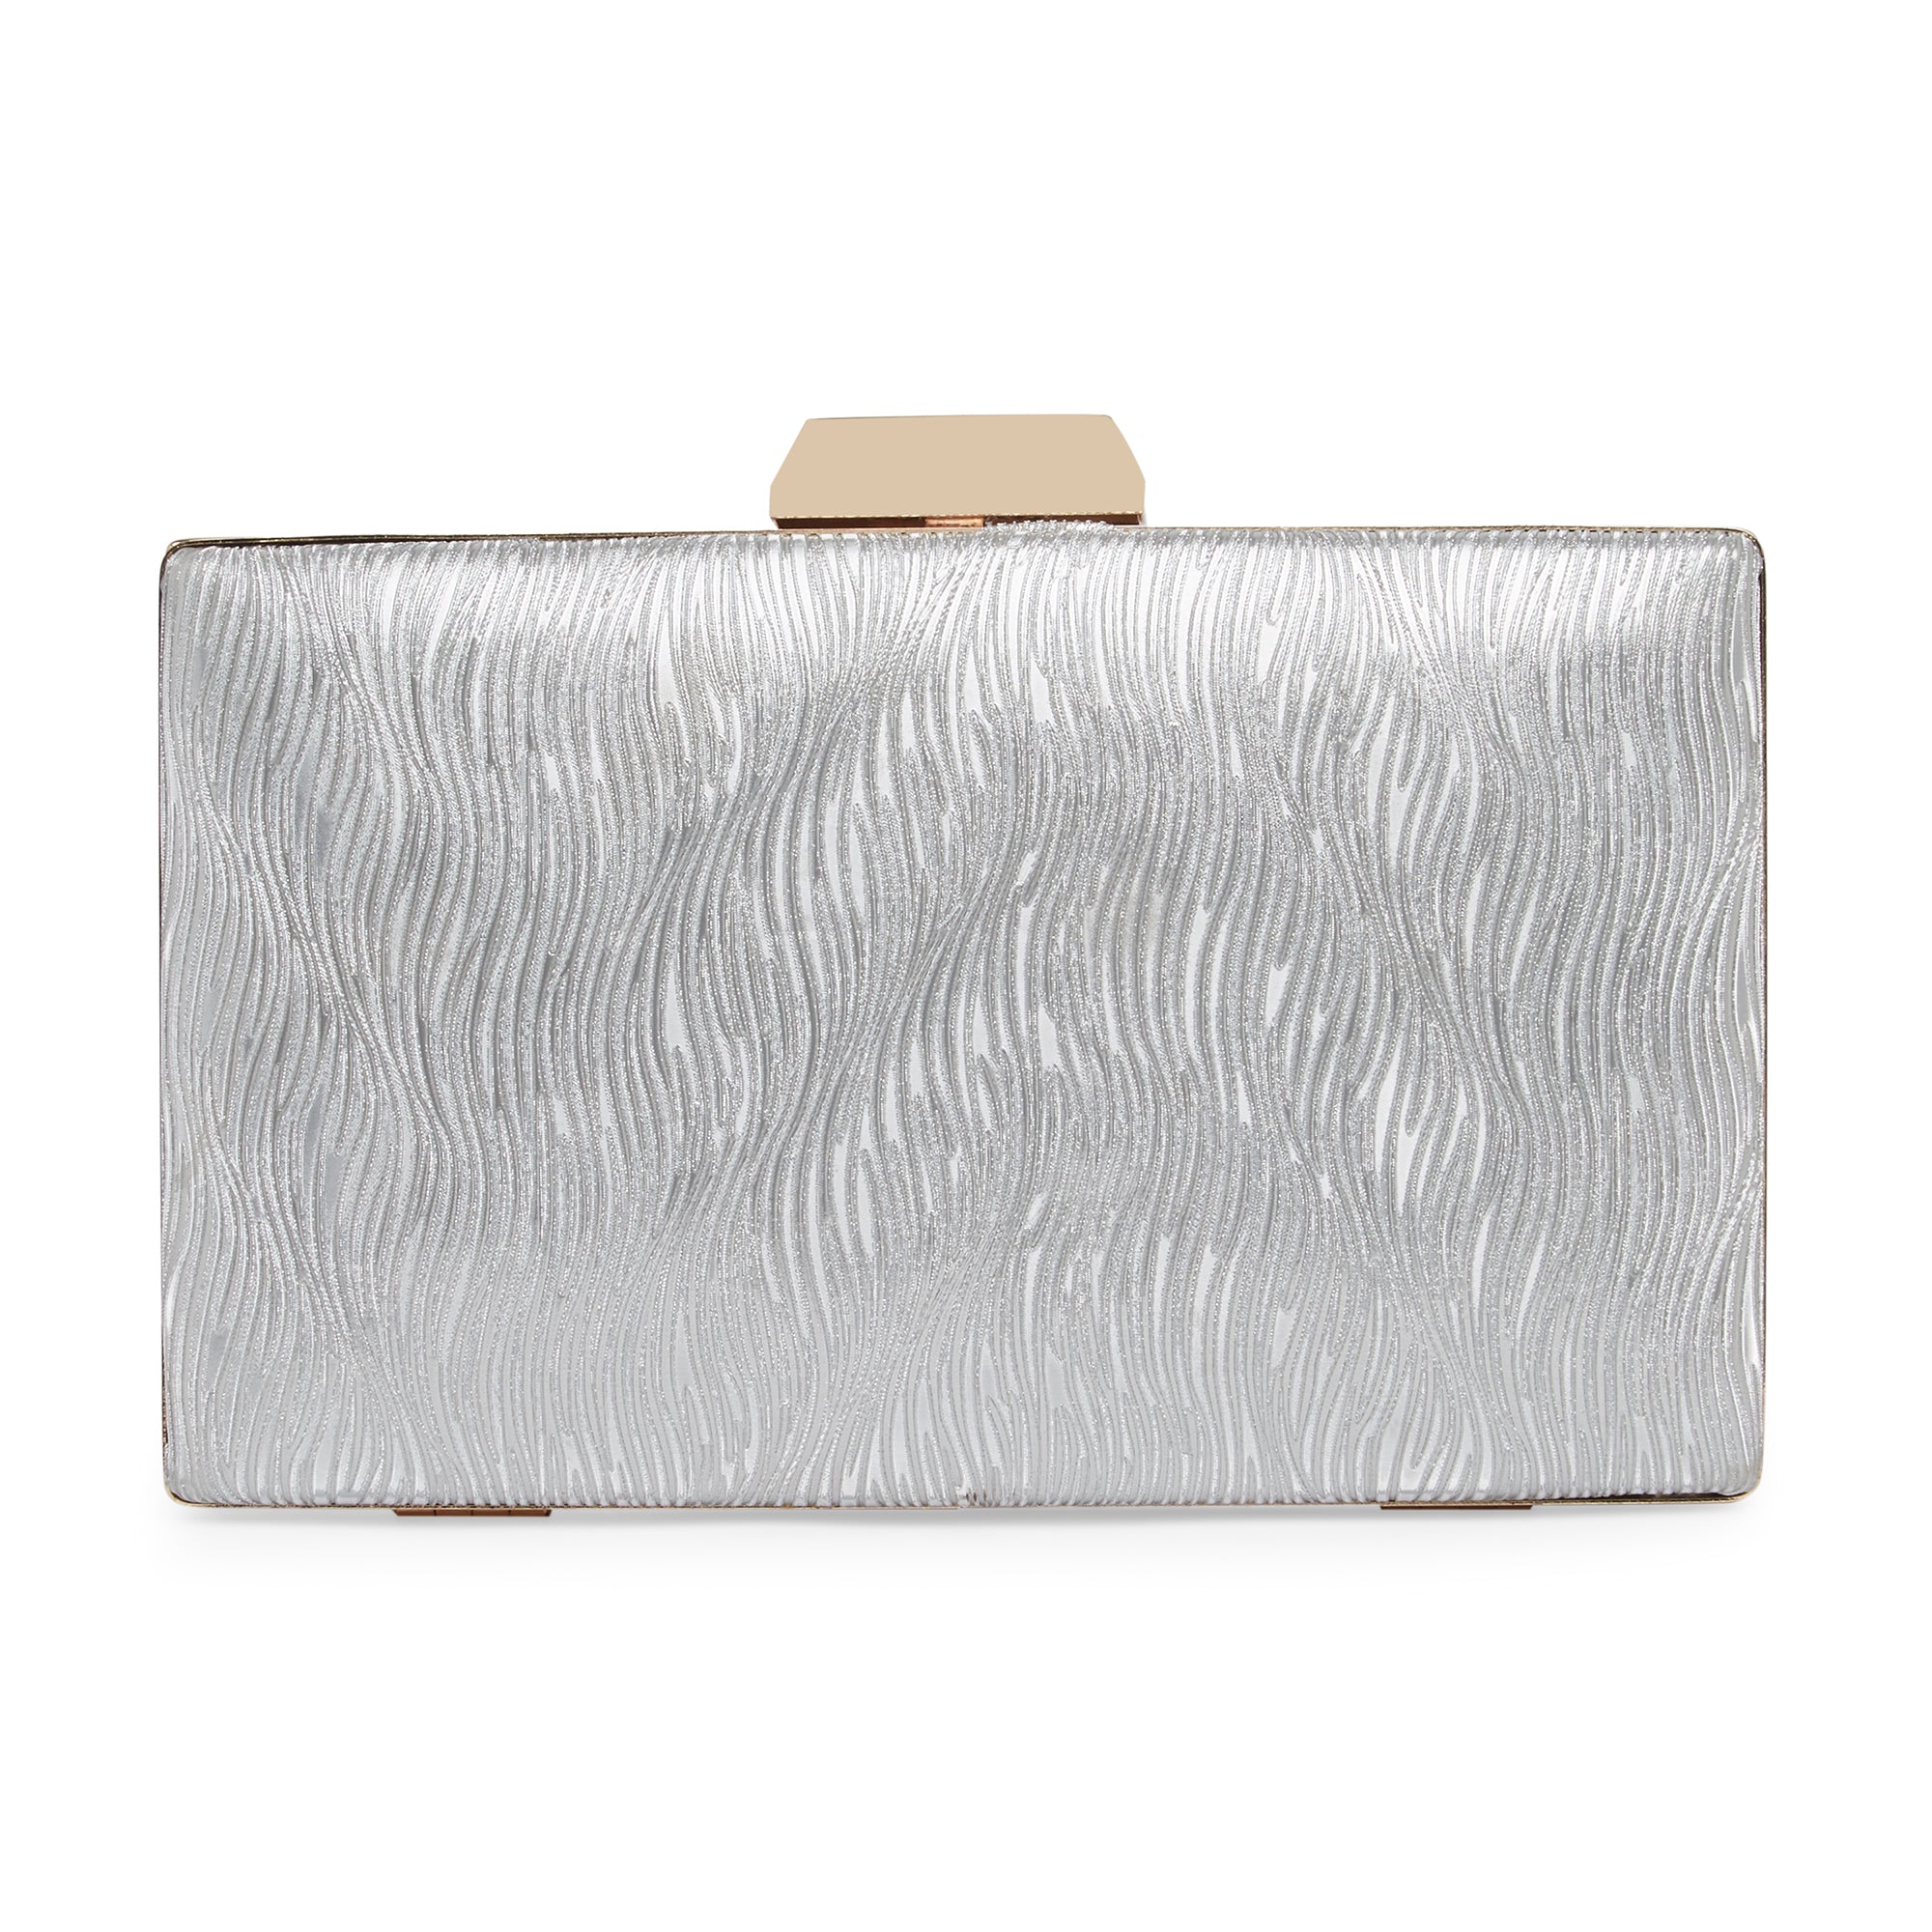 Metallic Silver Faux Snakeskin Clutch Purse- Limited Edition- Excellent -  10 X5 | eBay